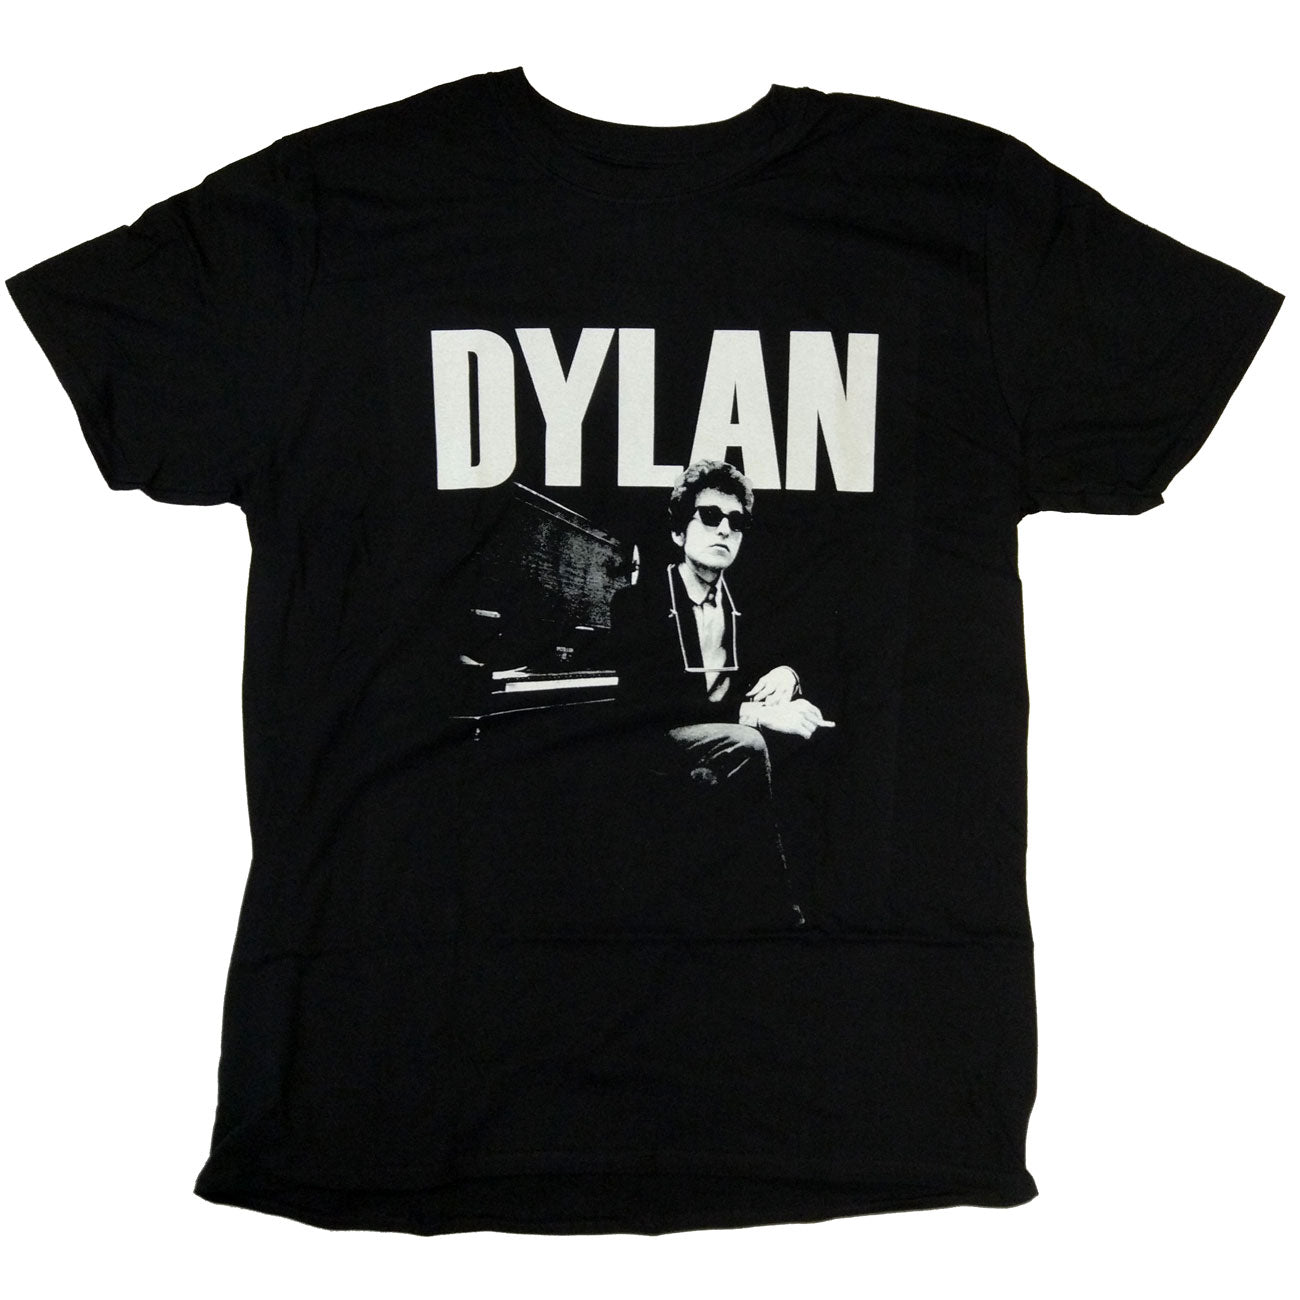 Bob Dylan T Shirt - At The Piano 100% Official Dylan Merchandise